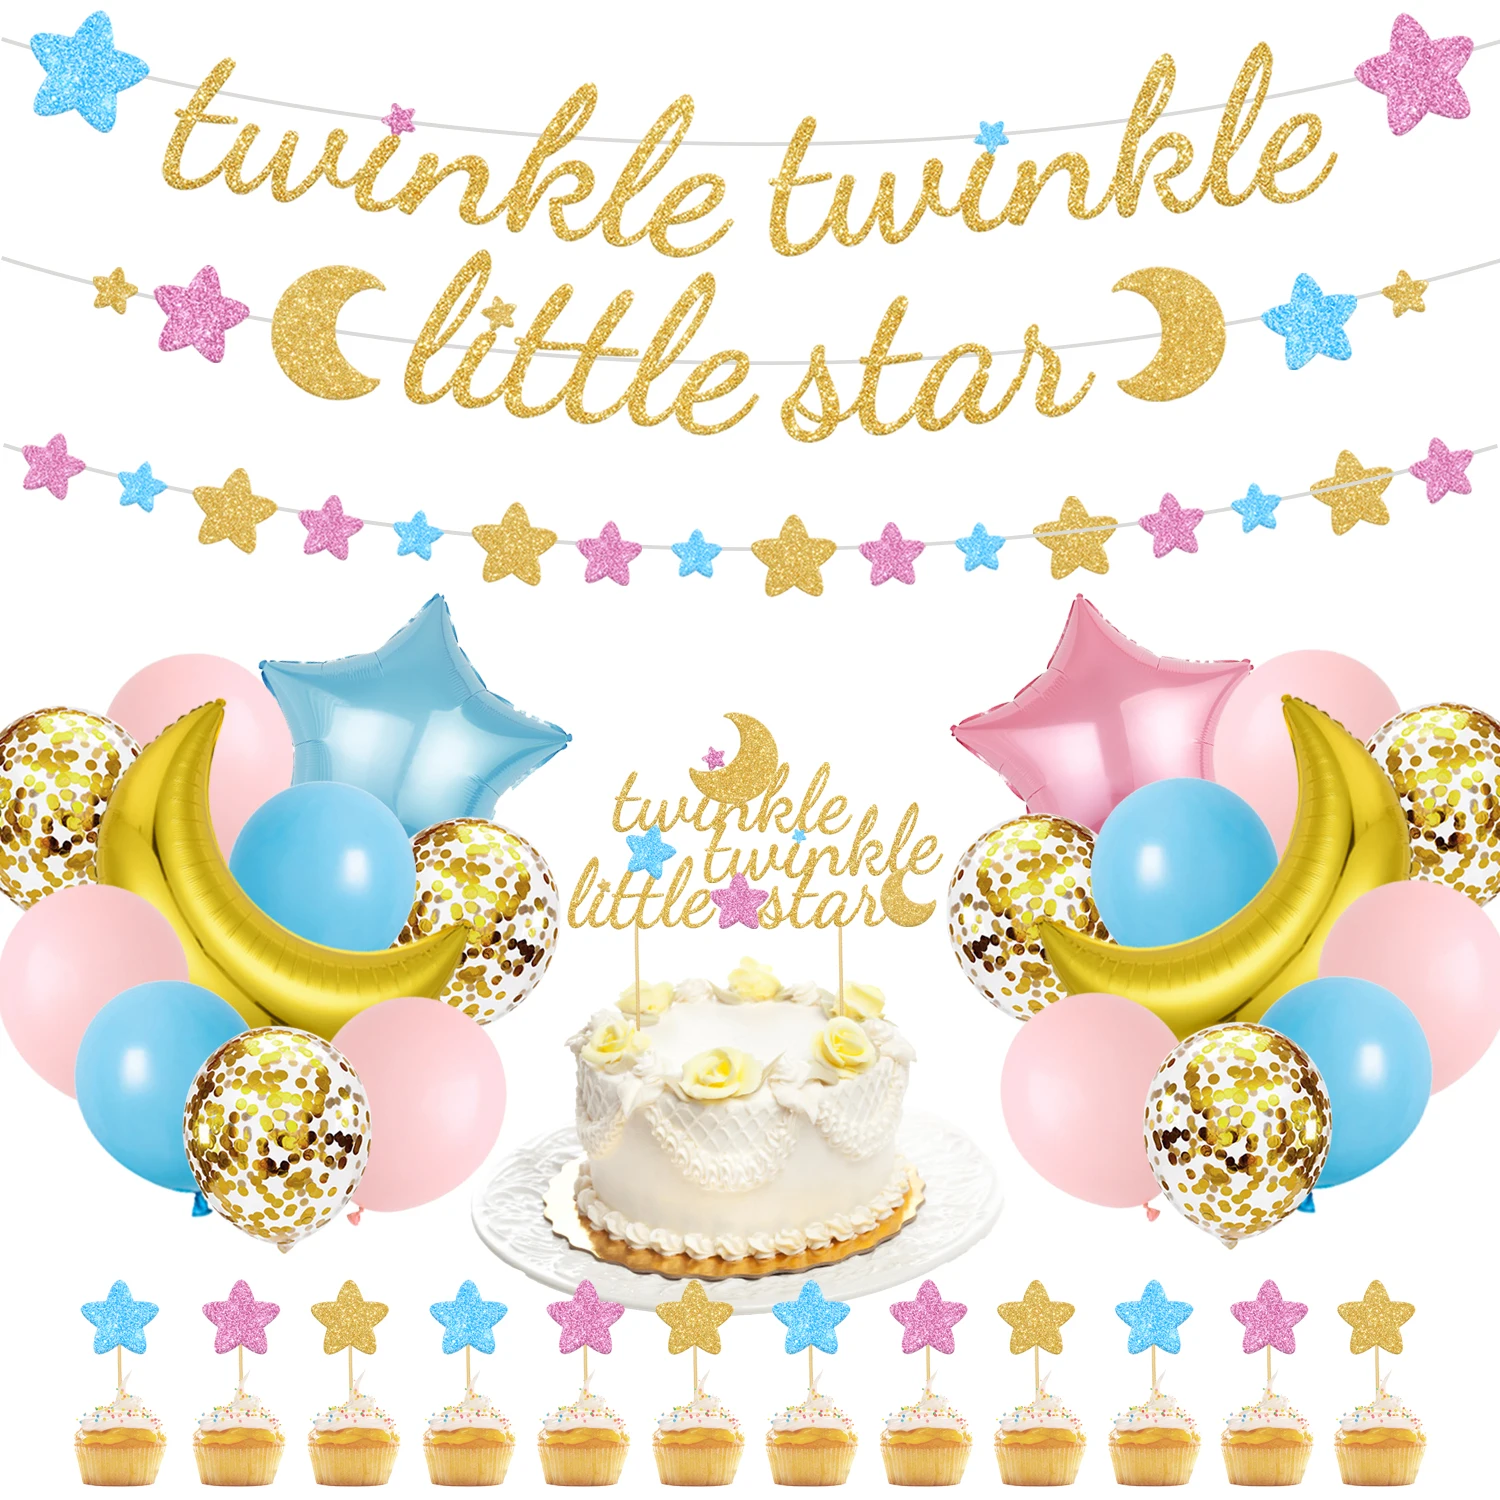 

Sursurprise Pink Blue Twinkle Twinkle Little Star Baby Shower Decorations Star Balloons Banner Cake Topper Birthday Party Decor